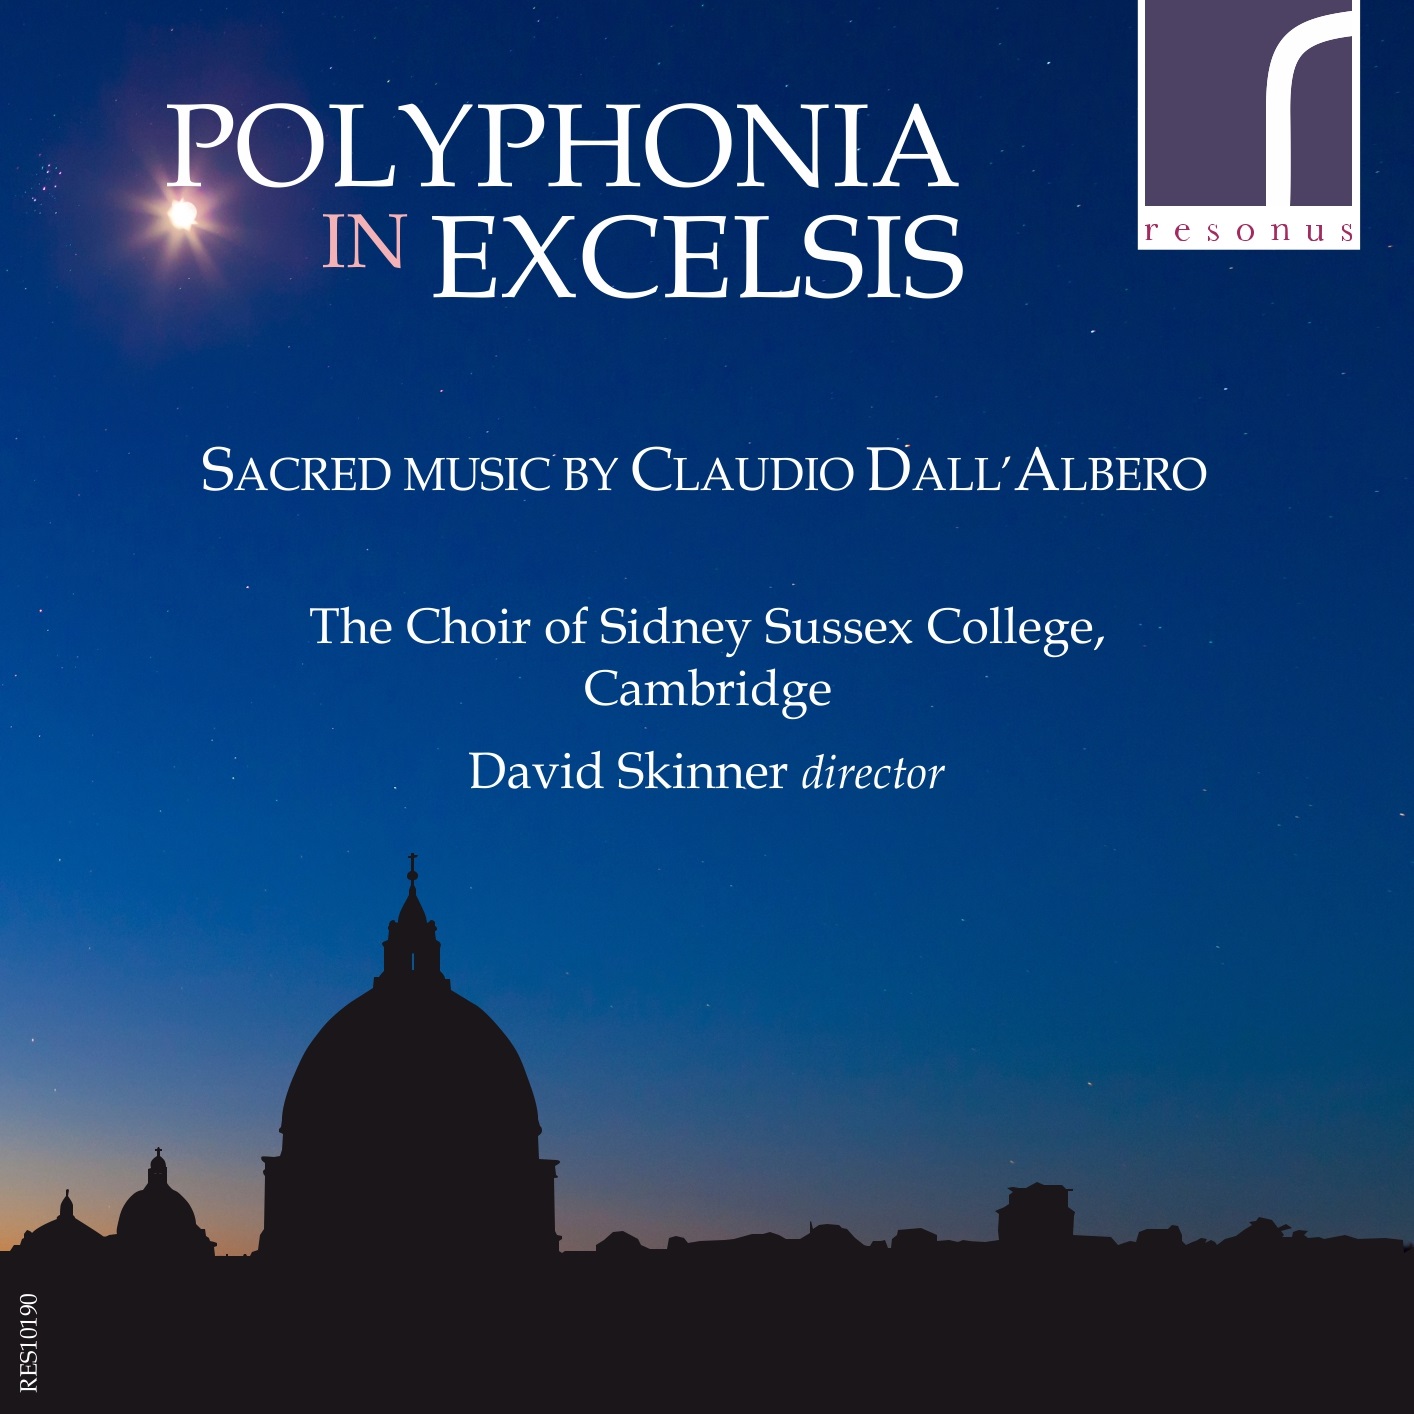 David Skinner - Polyphonia in Excelsis: Sacred Music by Claudio Dall’albero (2017) [FLAC 24bit/96kHz]